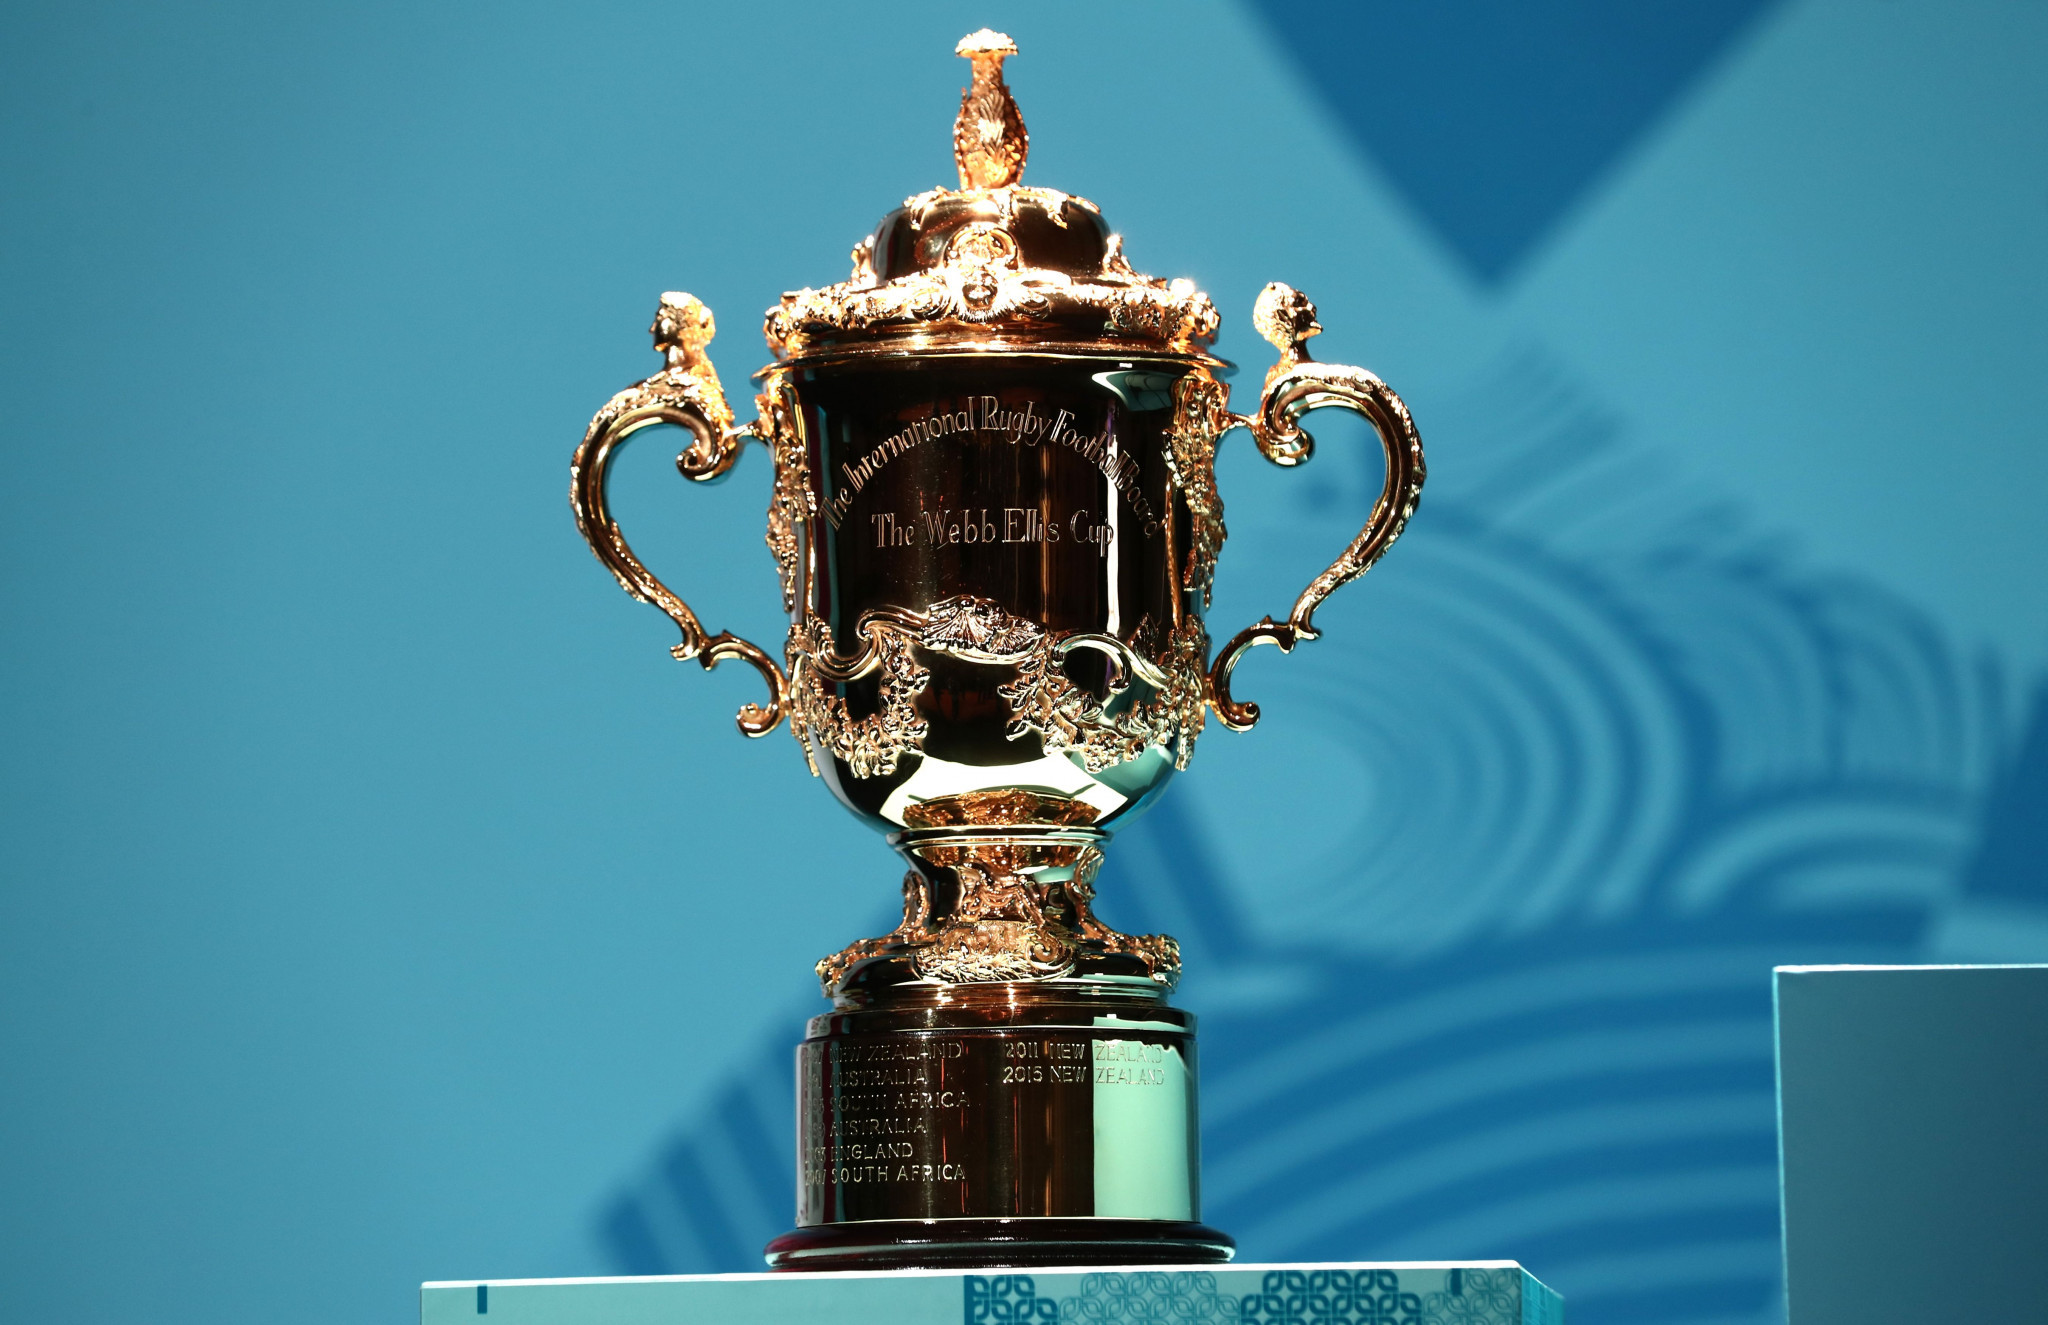 Tickets for the 2019 Rugby World Cup will go on sale again this week ©Getty Images